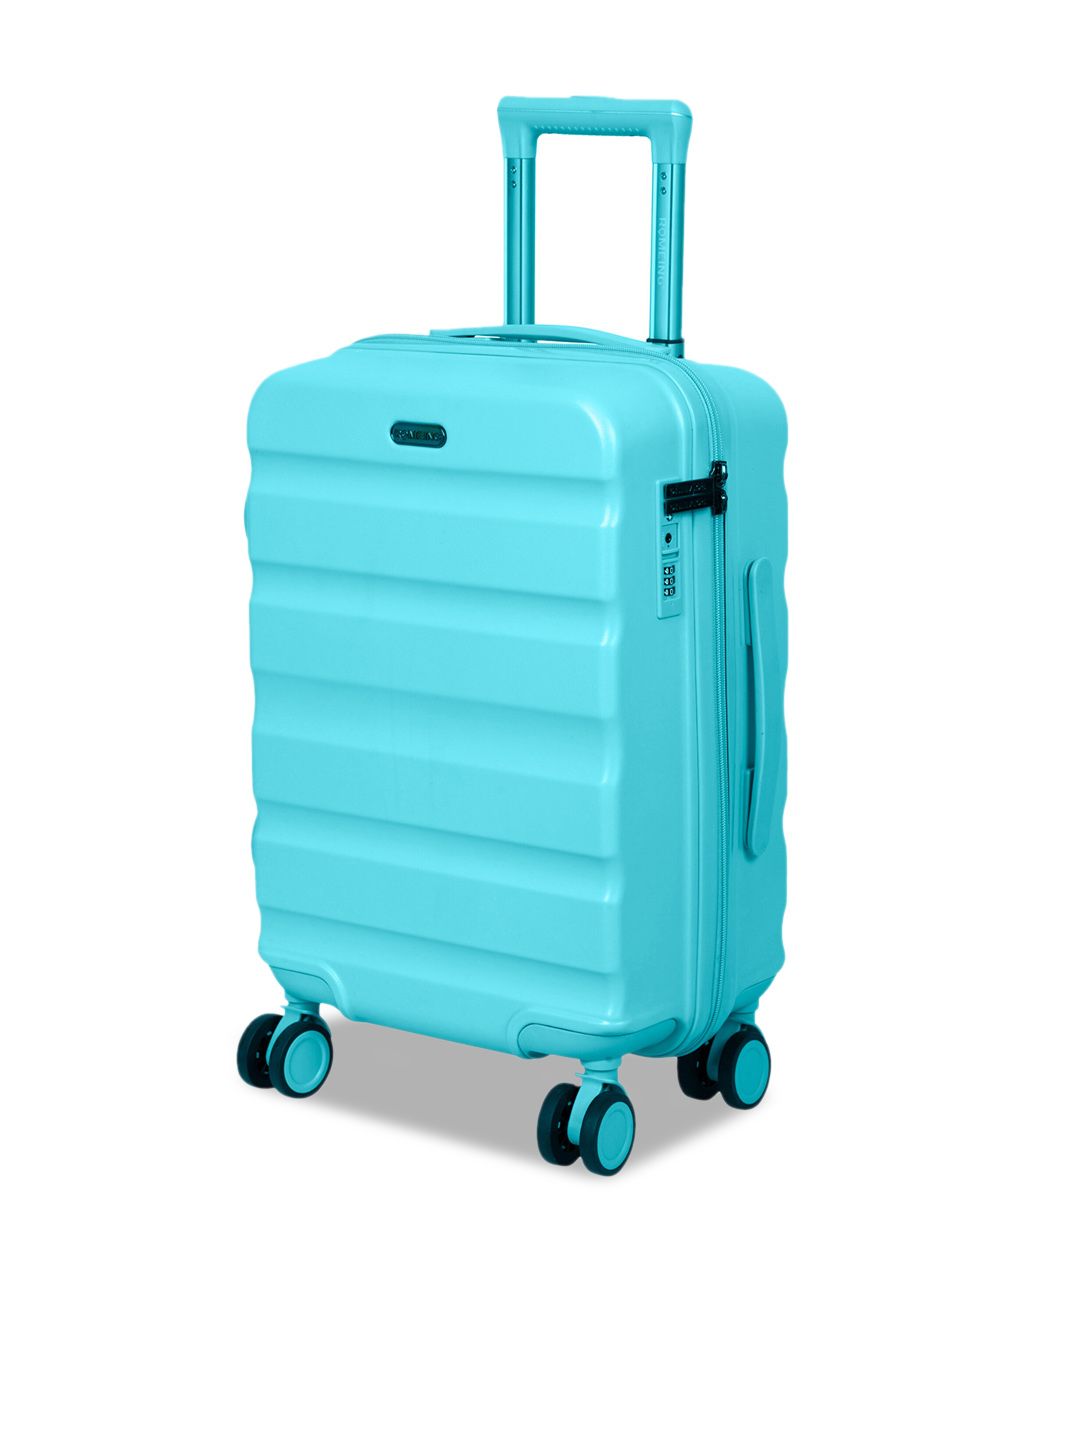 ROMEING Venice Blue Textured Hard-Sided Polycarbonate Cabin Trolley Suitcase Price in India